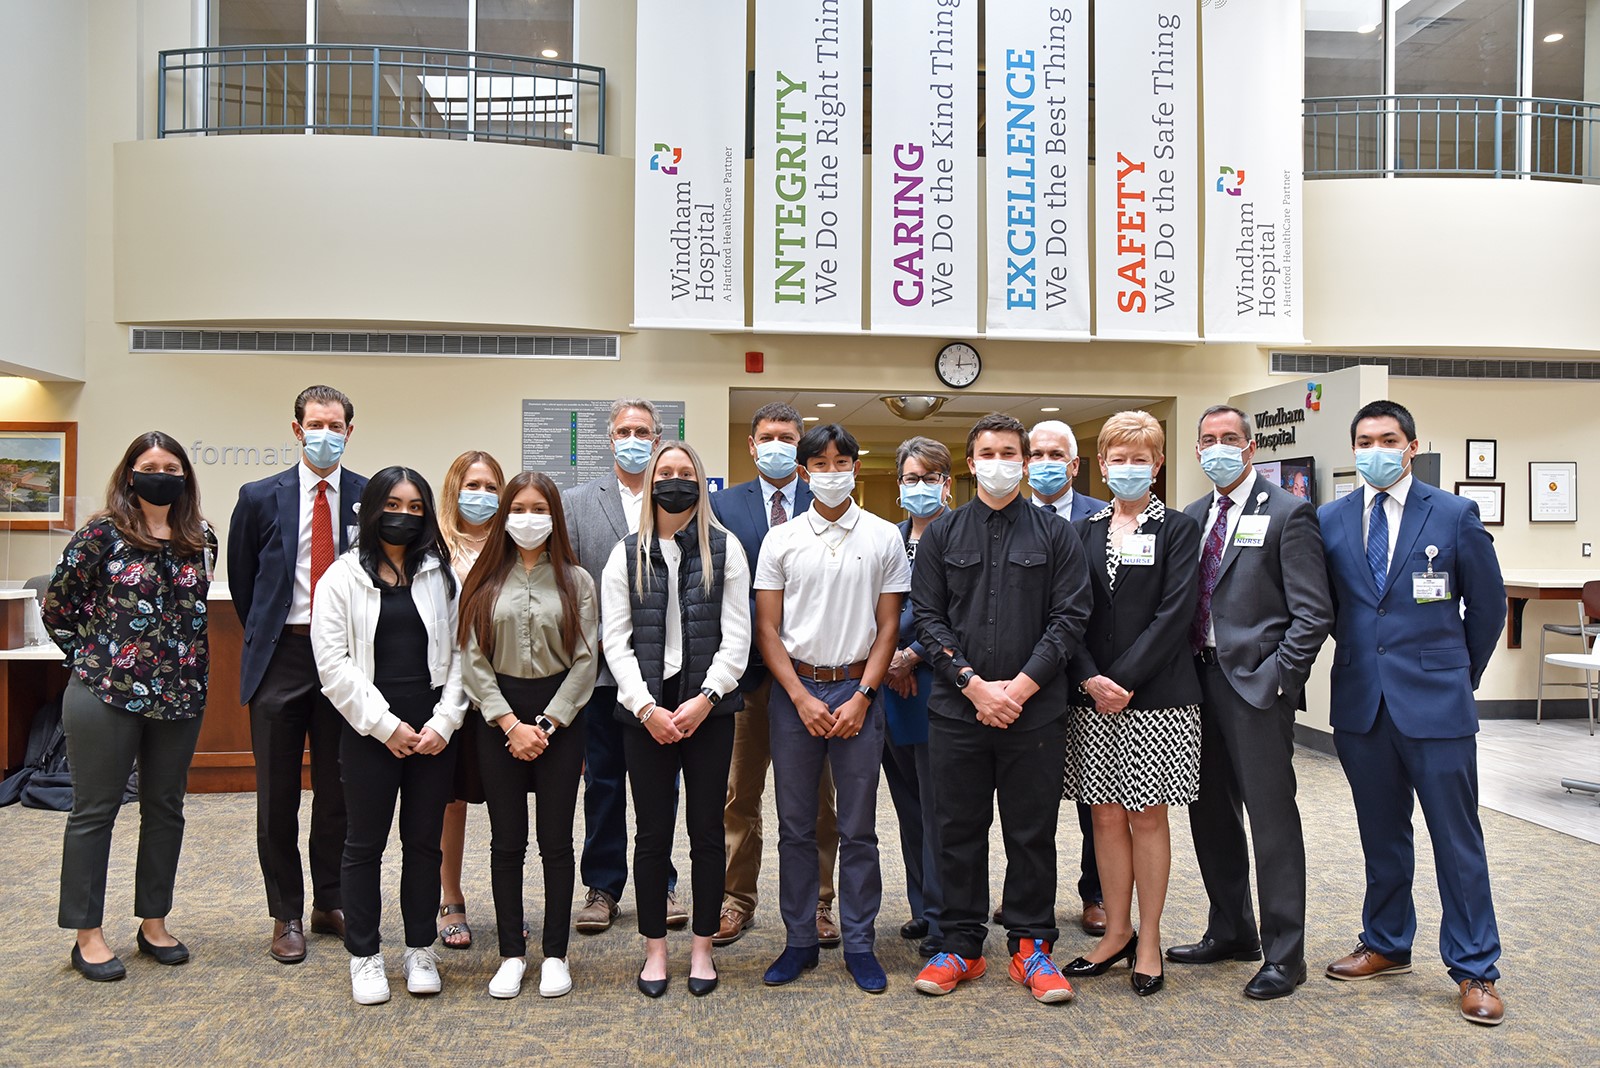 Windham Hospital Partnership Connects Local High School Students with Healthcare Careers